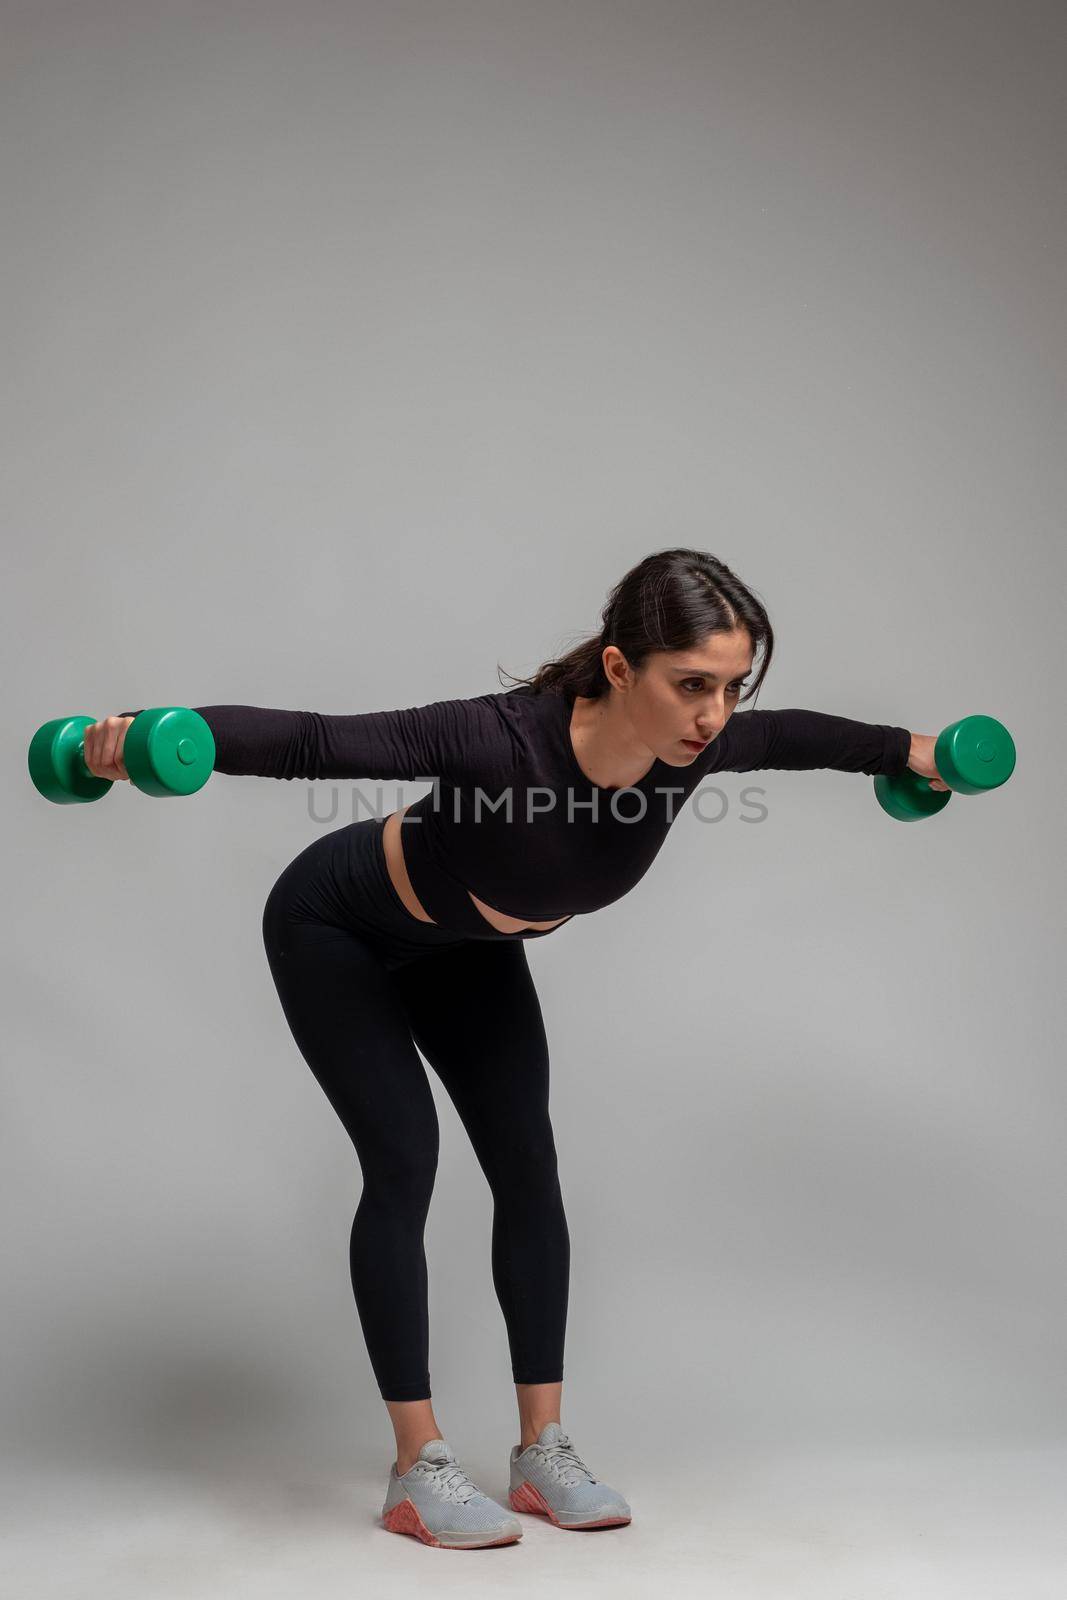 Athletic girl in black sportswear doing exercise to sculpt and tone shoulders, performing reverse fly with dumbbells on grey background. Sport and fitness concept